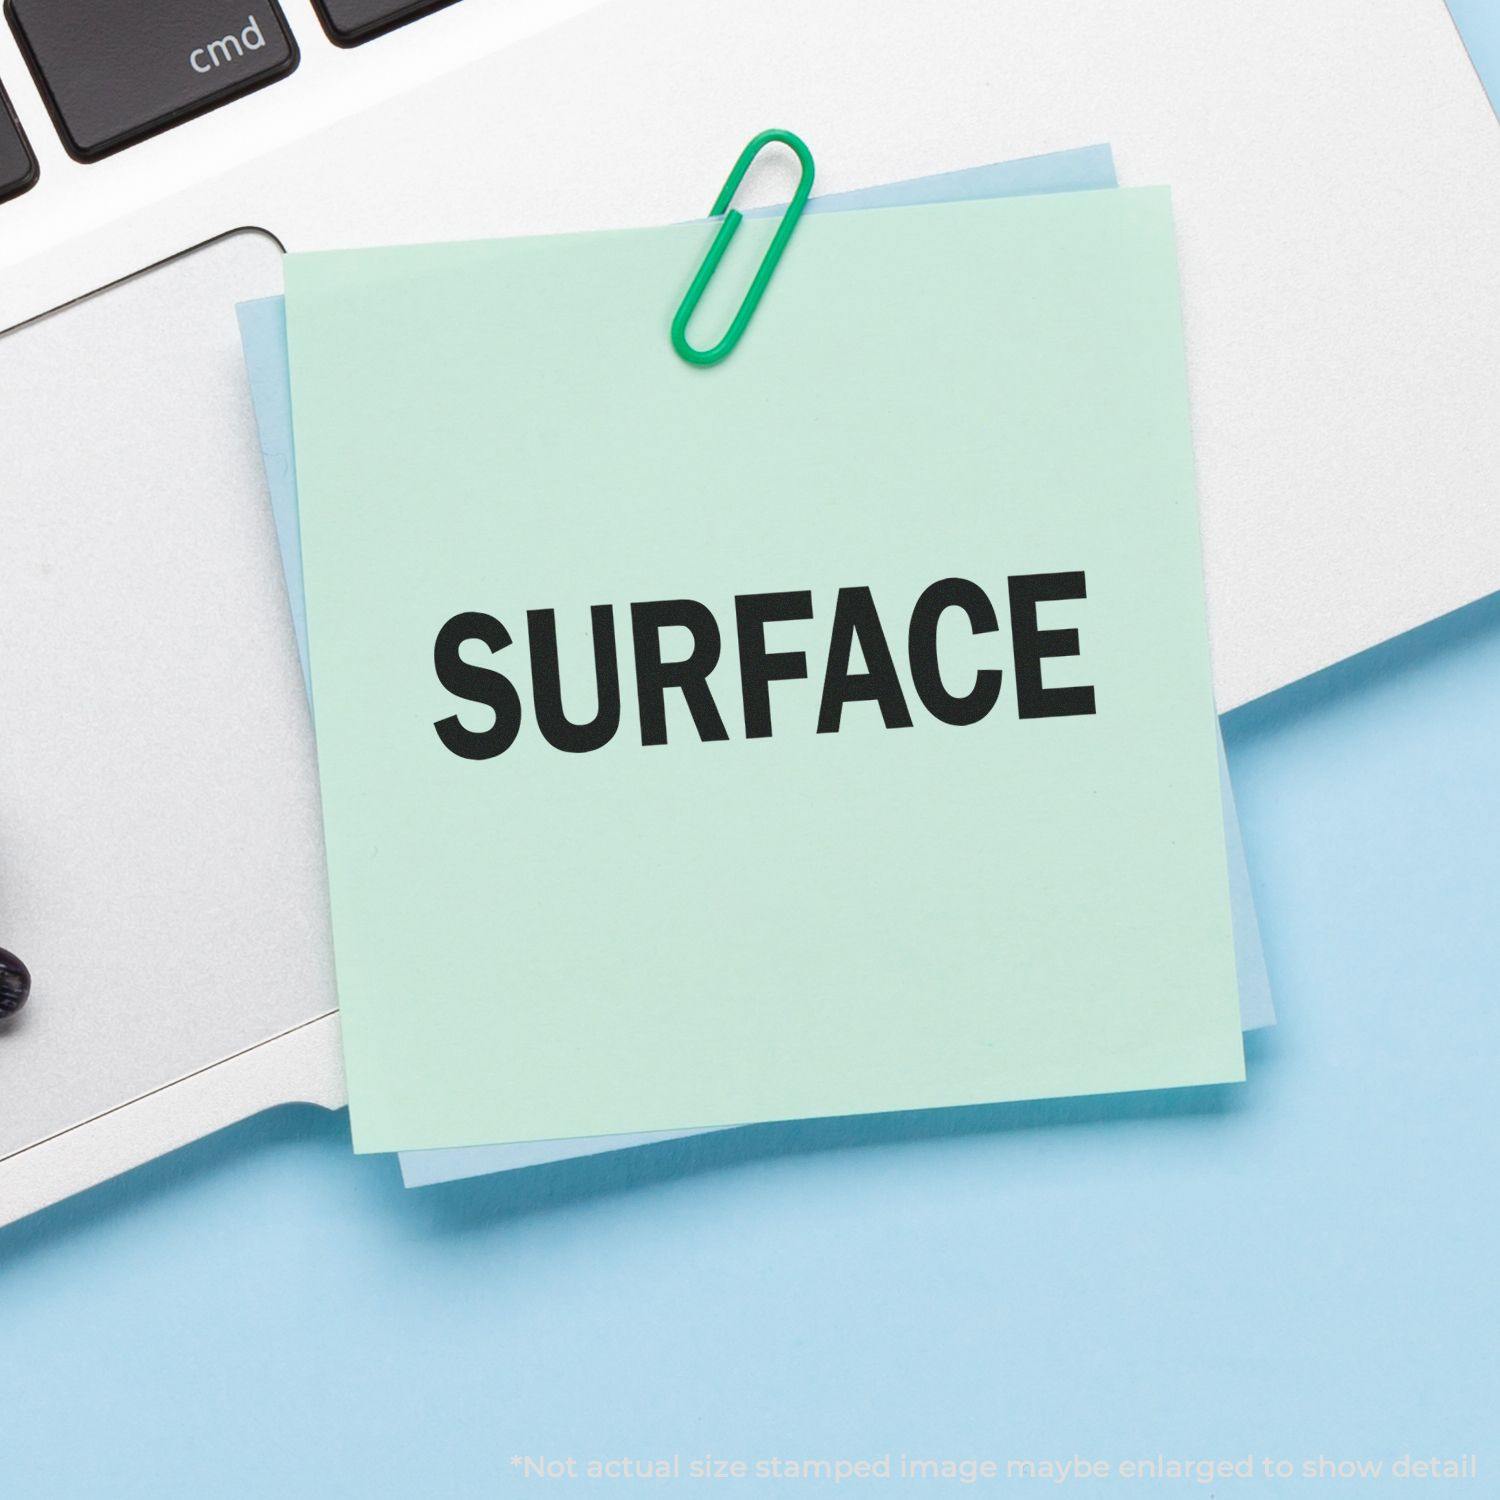 A self-inking stamp with a stamped image showing how the text "SURFACE" in a large font is displayed by it after stamping.